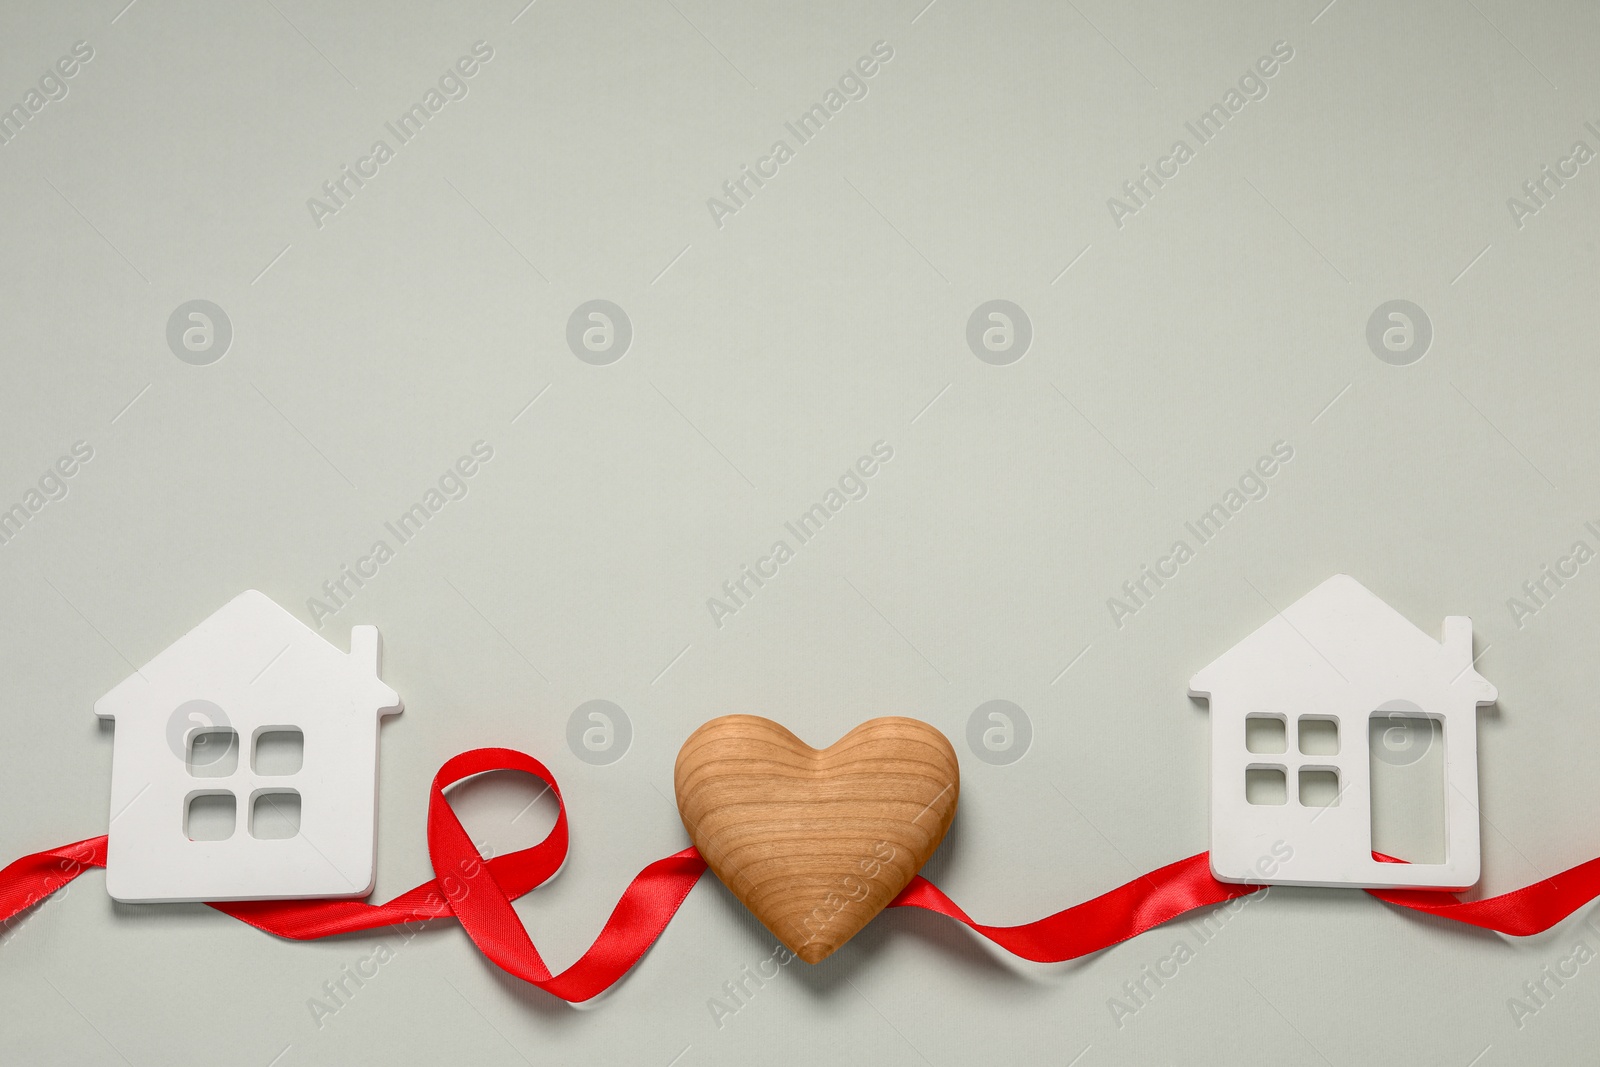 Photo of Red ribbon and decorative heart between two house models on light gray background symbolizing connection in long-distance relationship, above view. Space for text